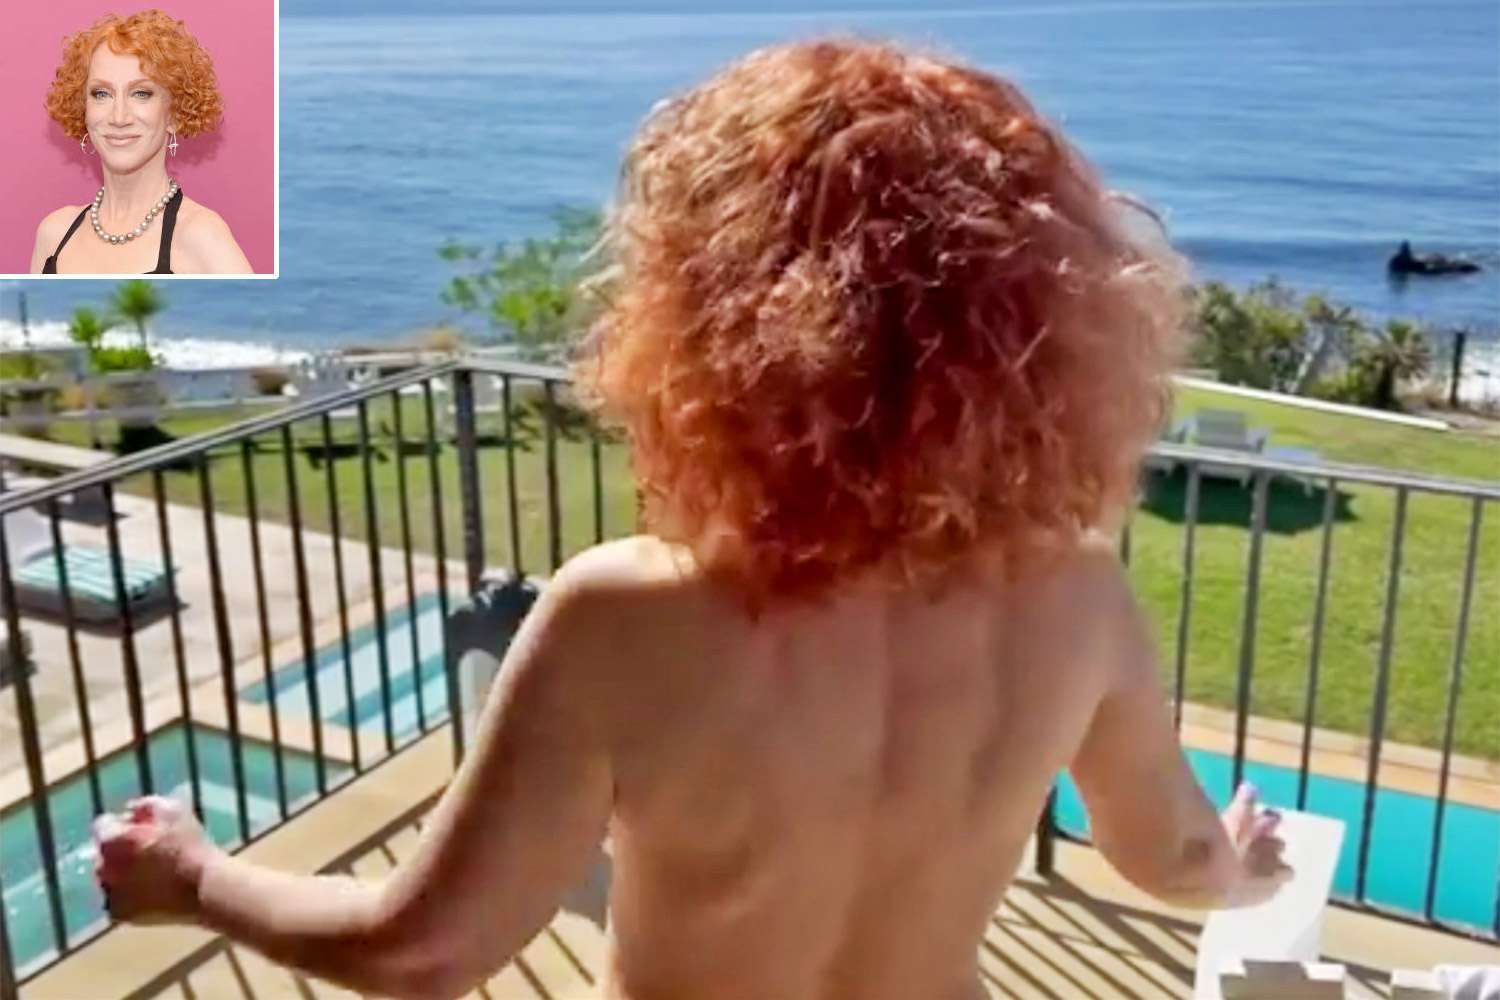 bryce anslinger add kathy griffin naked photo